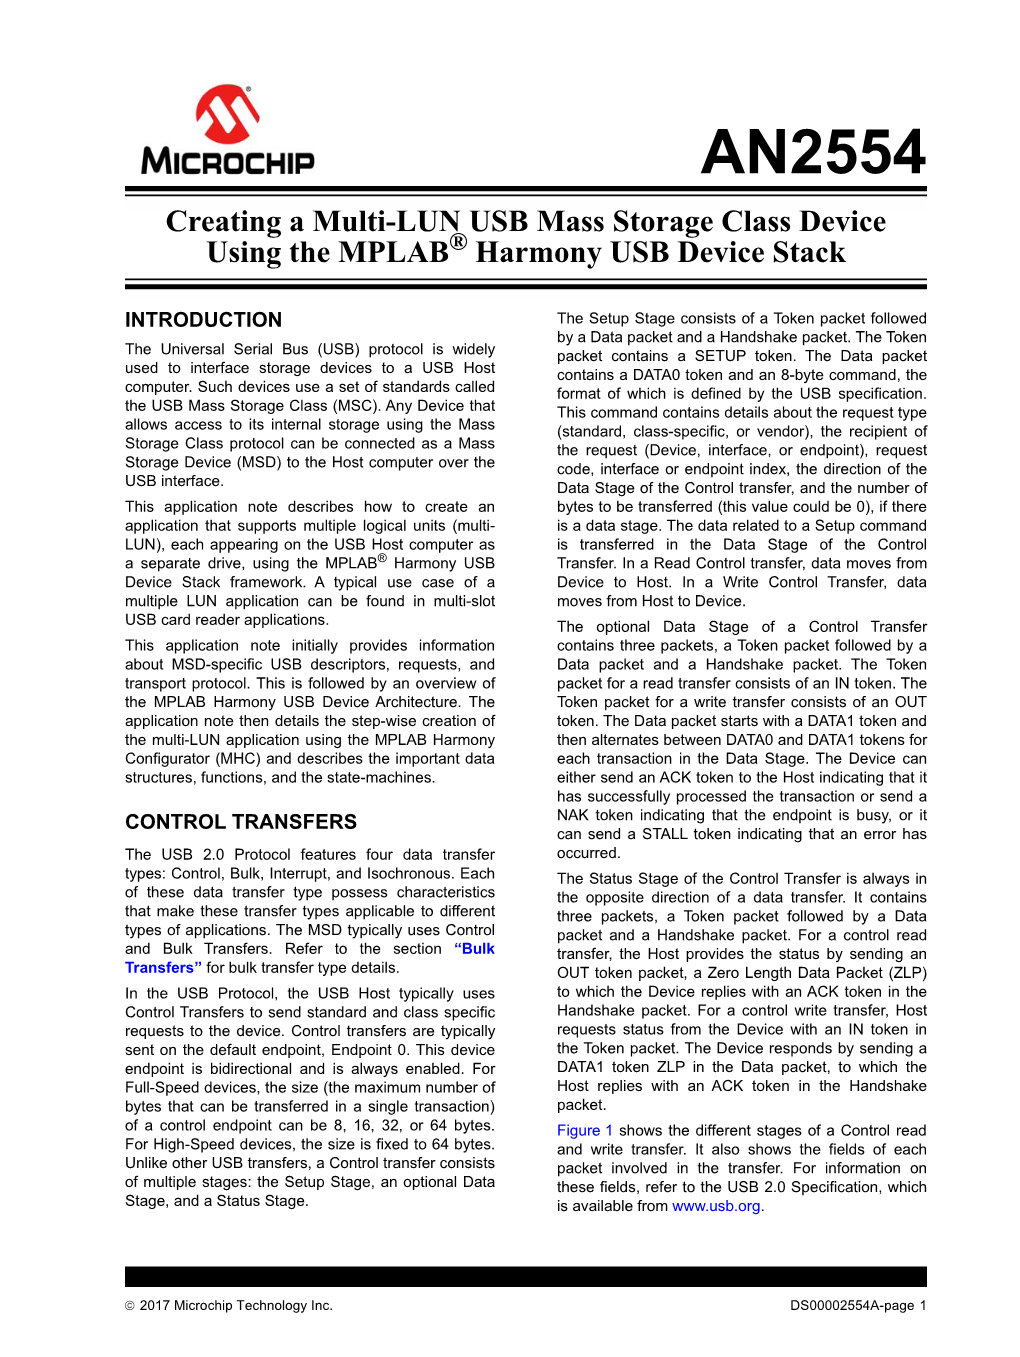 Creating a Multi-LUN USB Mass Storage Class Device Using the MPLAB® Harmony USB Device Stack